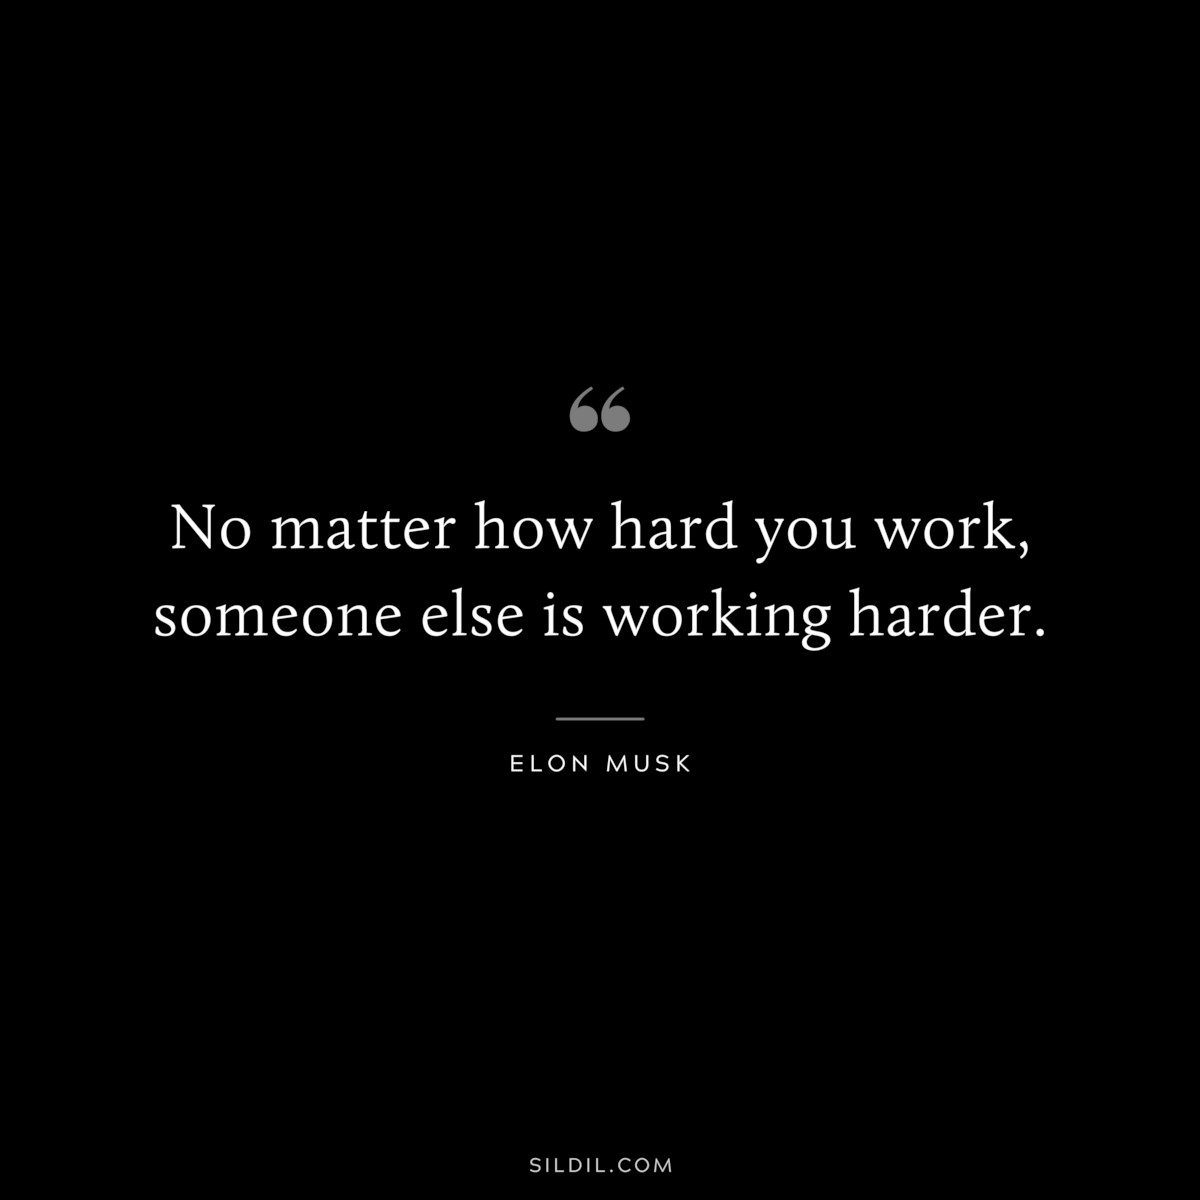 No matter how hard you work, someone else is working harder. ― Elon Musk